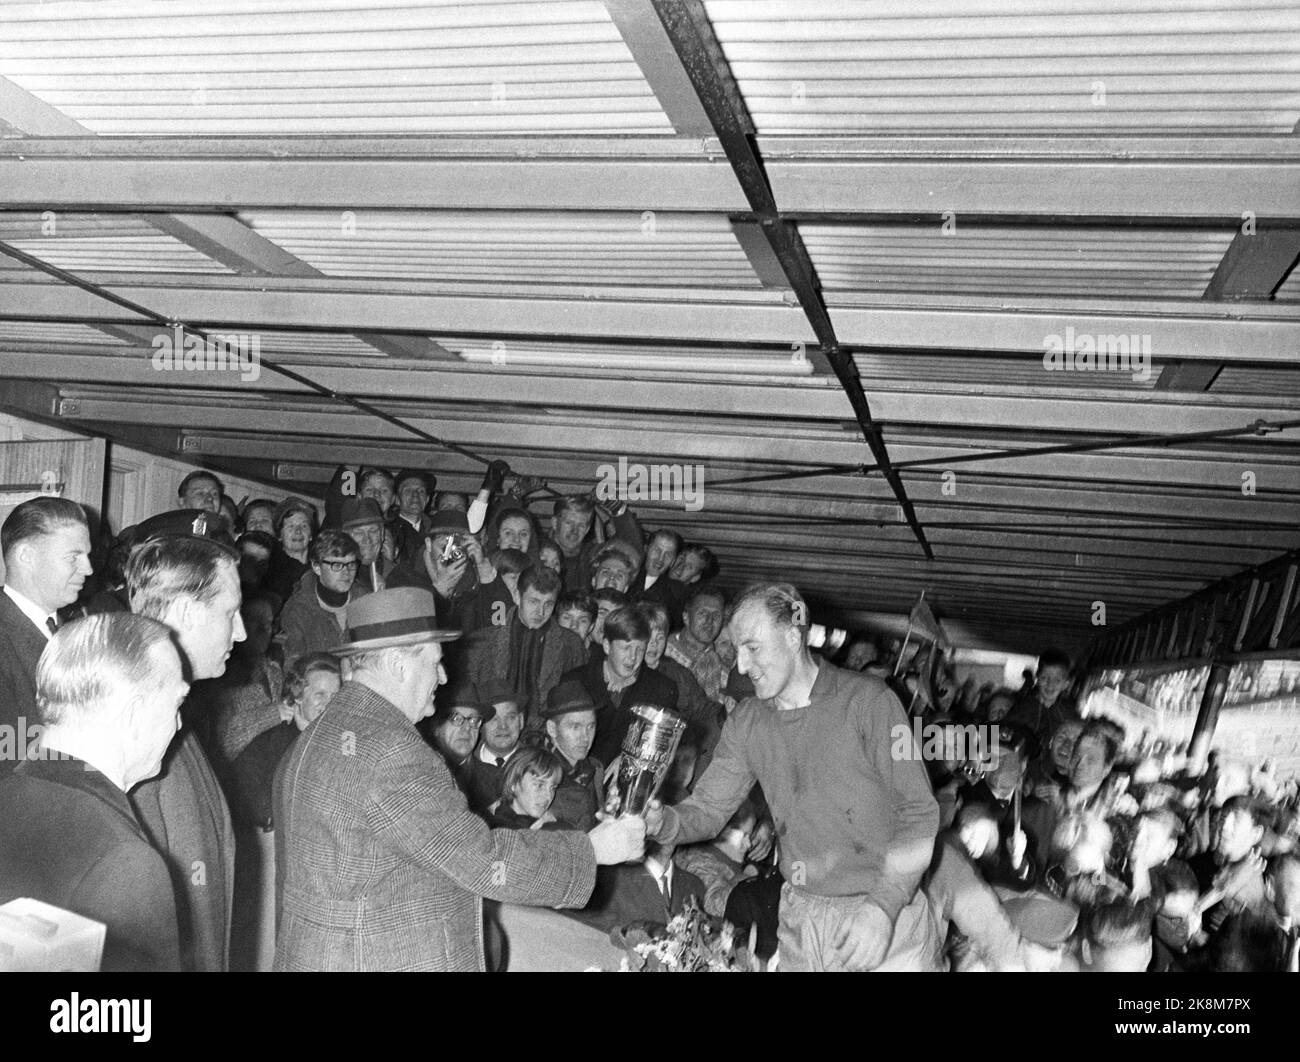 Oslo, 19651107. Ullevaal Stadium. Skeid -frigg 2-1. Cup final in football. This is from the third match. Finn Thorsen receives the King's Cup after the victory in the cup final against Frigg. Only 7,000 spectators were present at the third match in the battle for the King's Cup. Crown Prince Harald is on the left in the picture. Photo: Henrik Laurvik / NTB Stock Photo